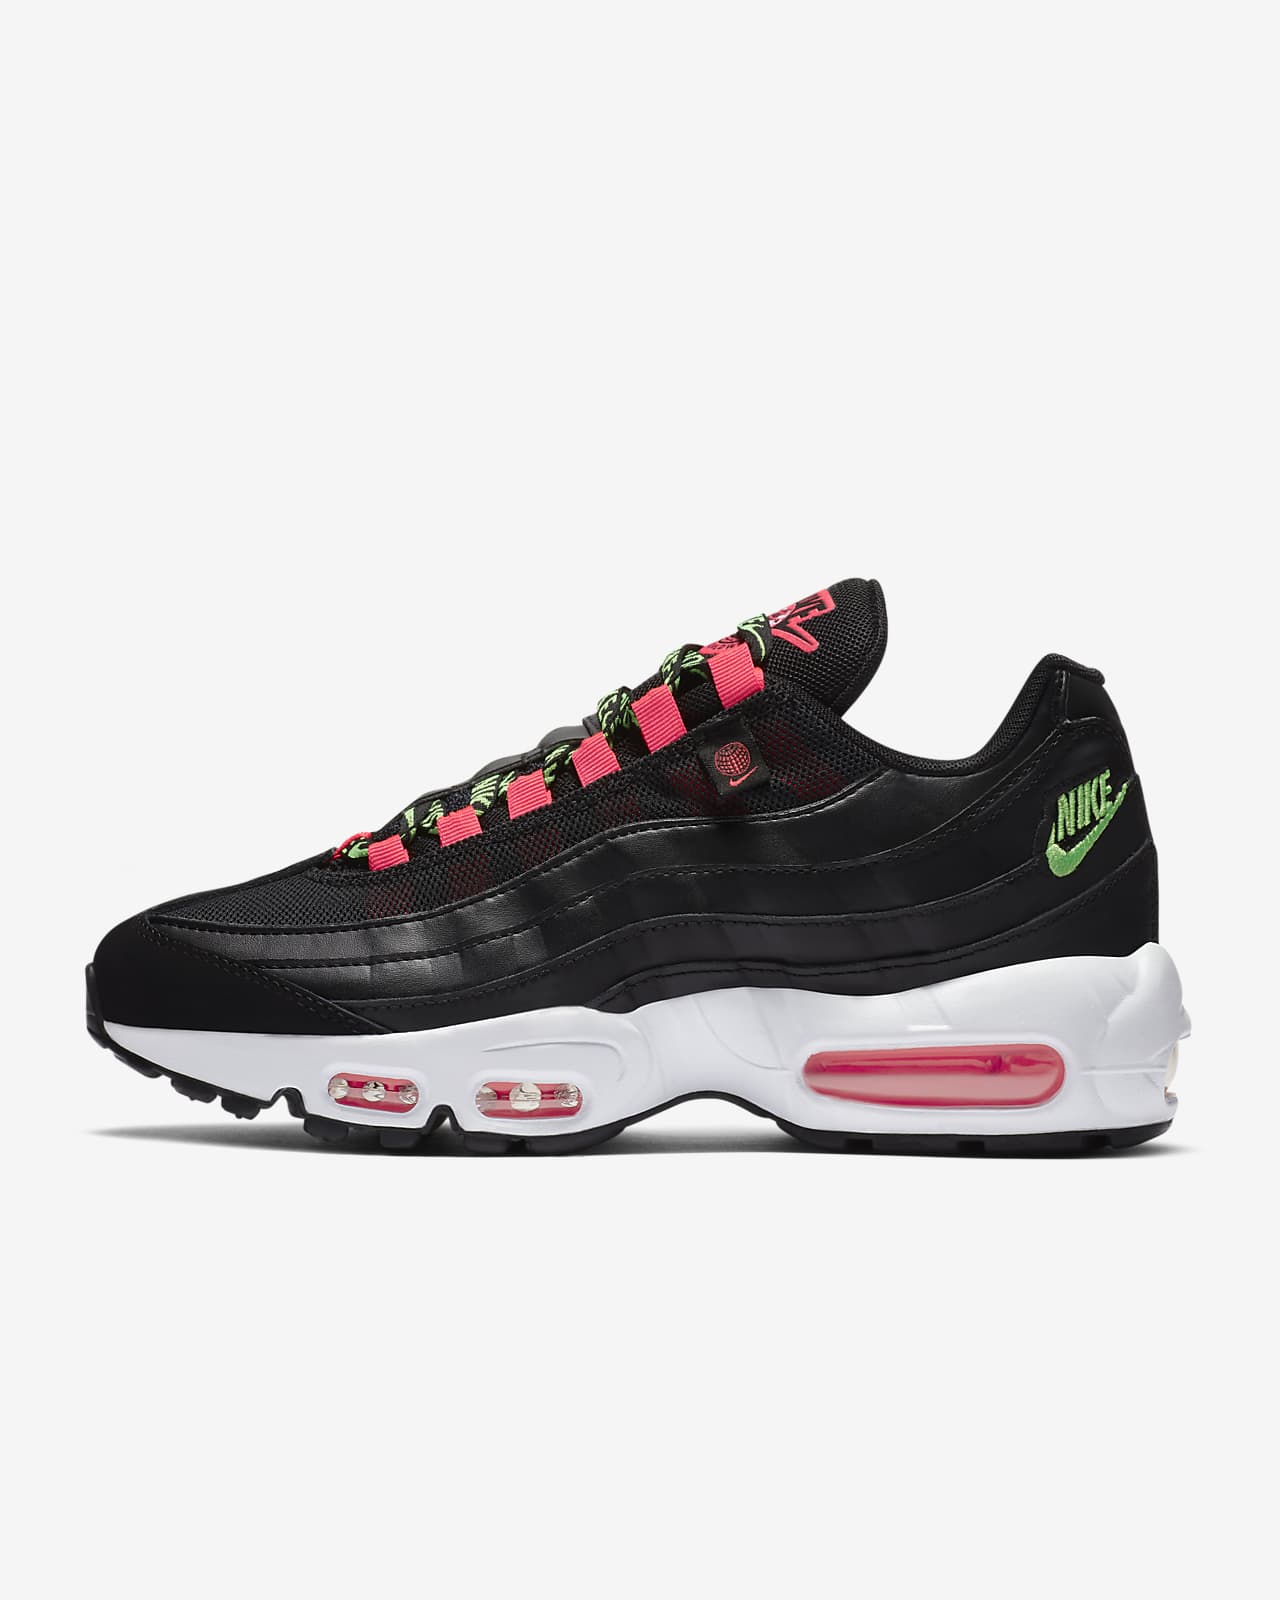 nike air max 95 offers